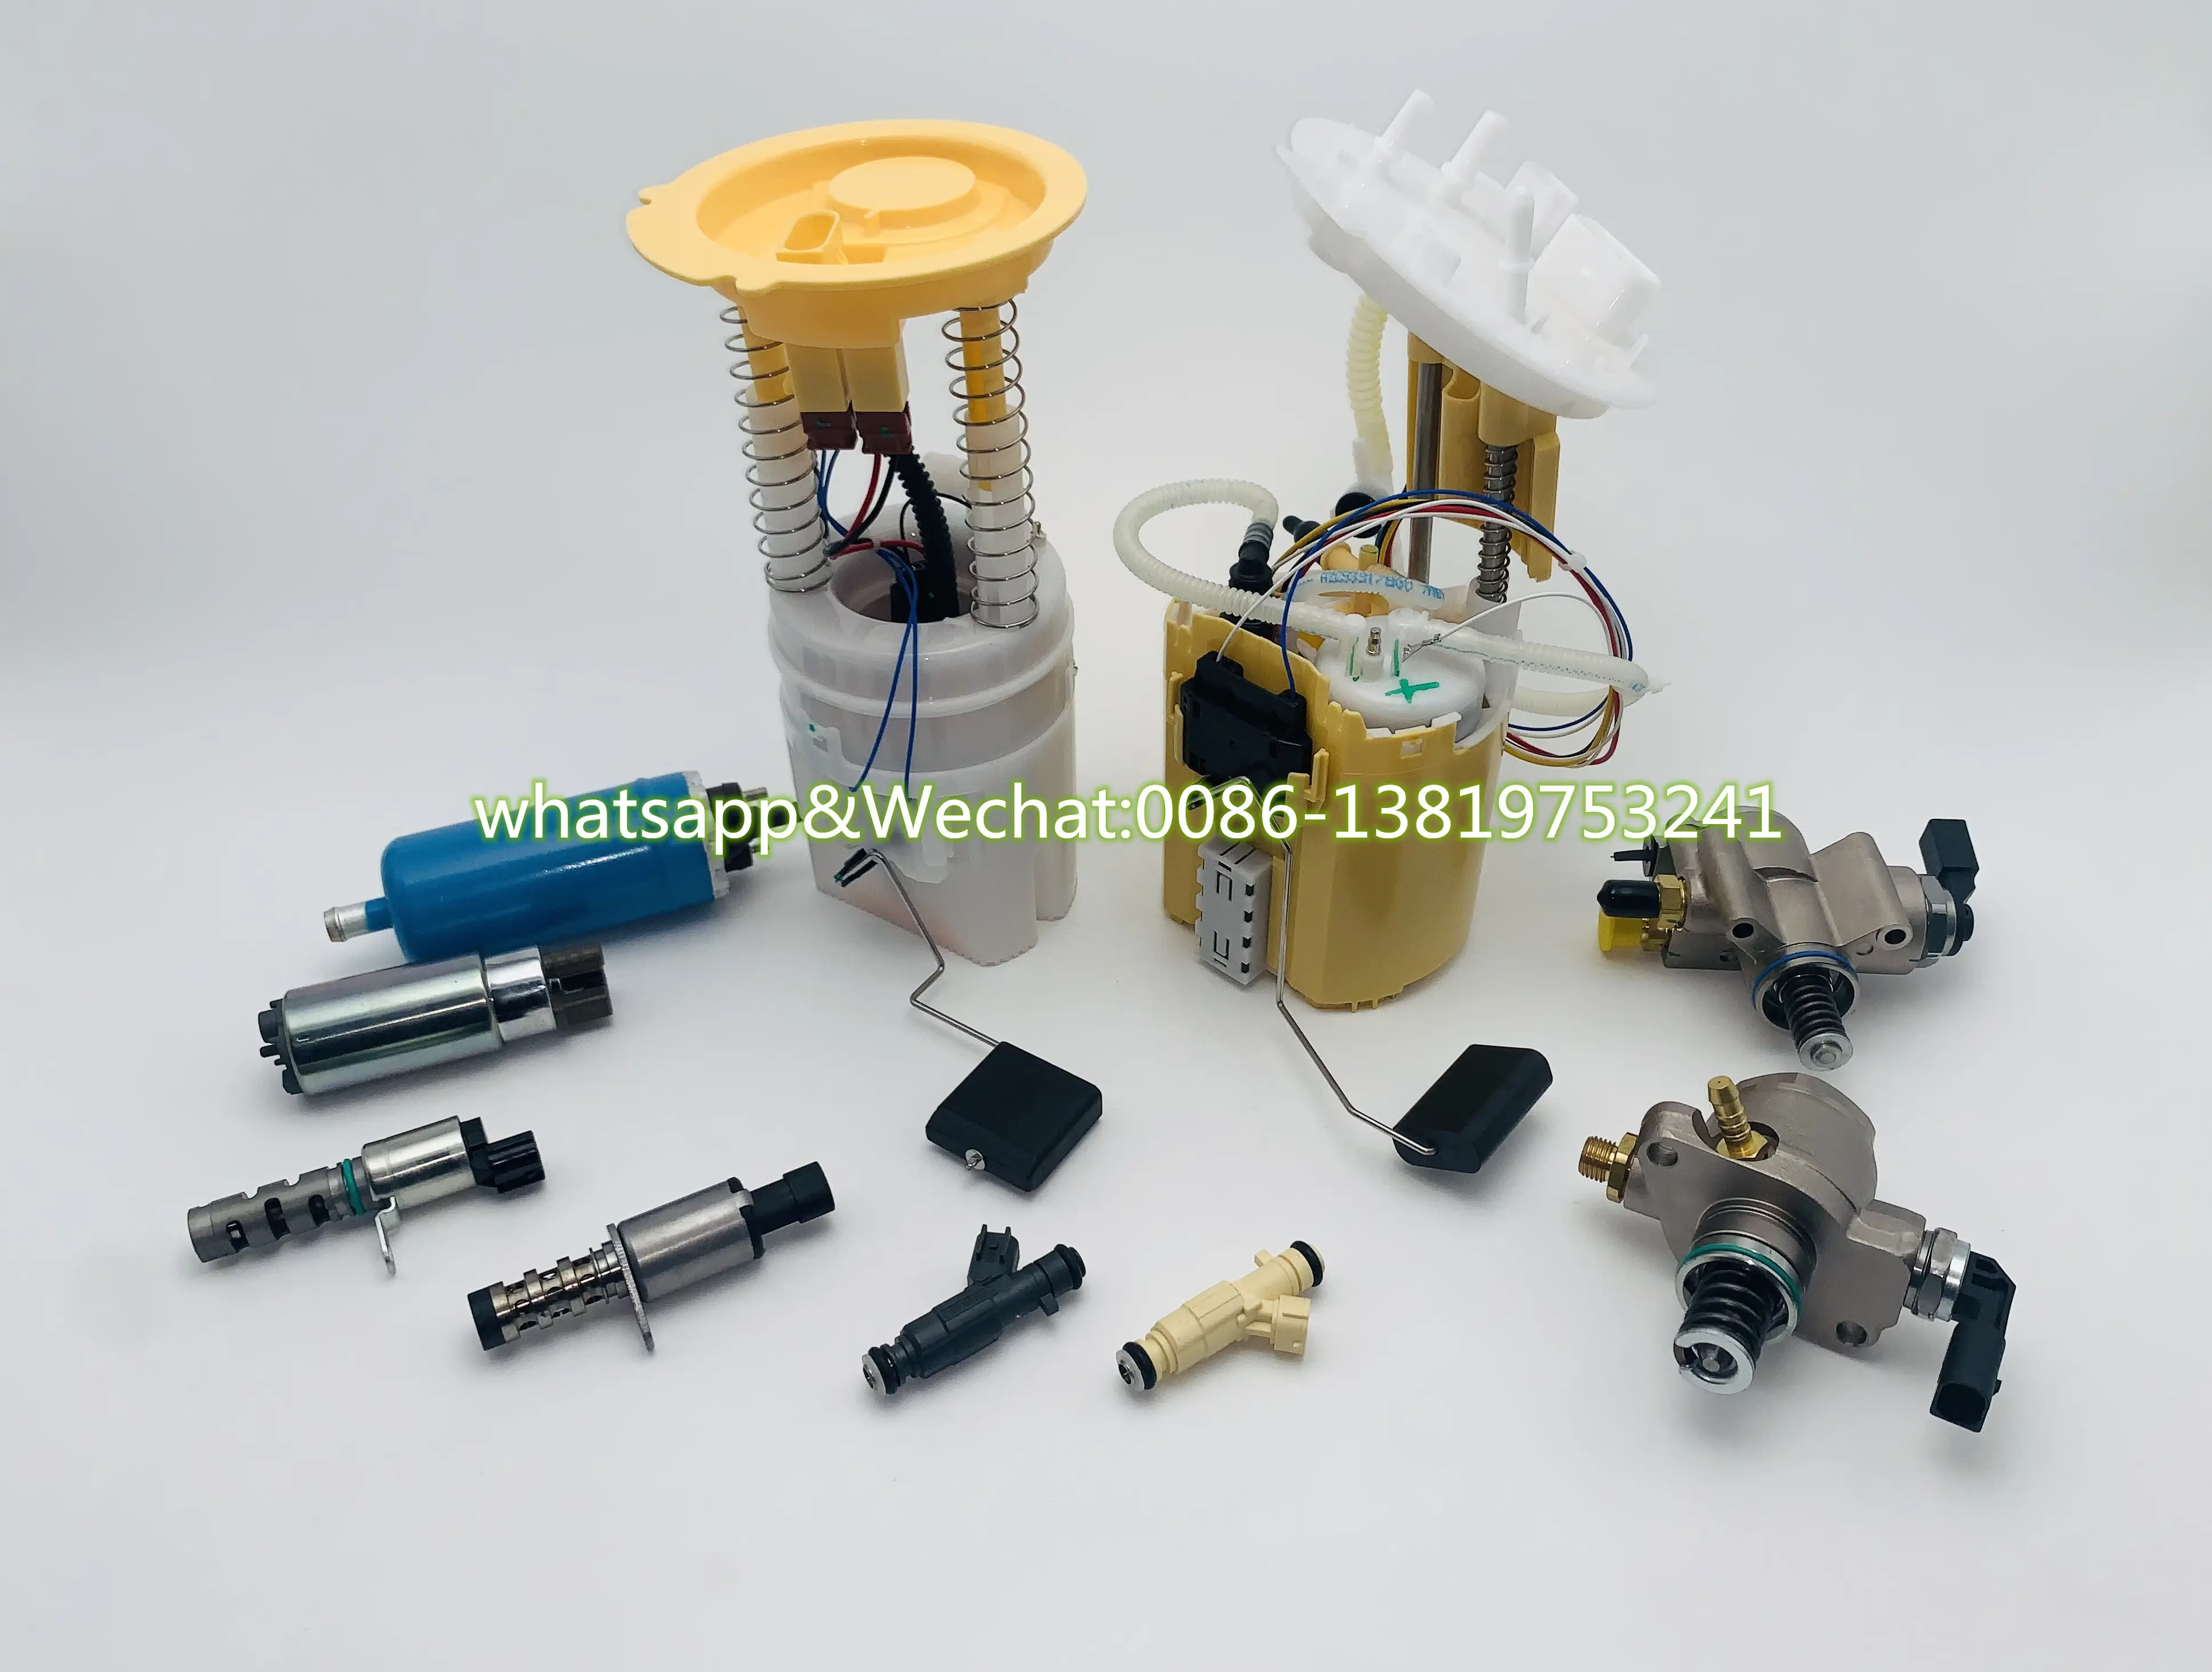 KS-A1258 HIGH Quality Fuel Pump Assembly for Great Wall H7 main pump/VVT/2.0T